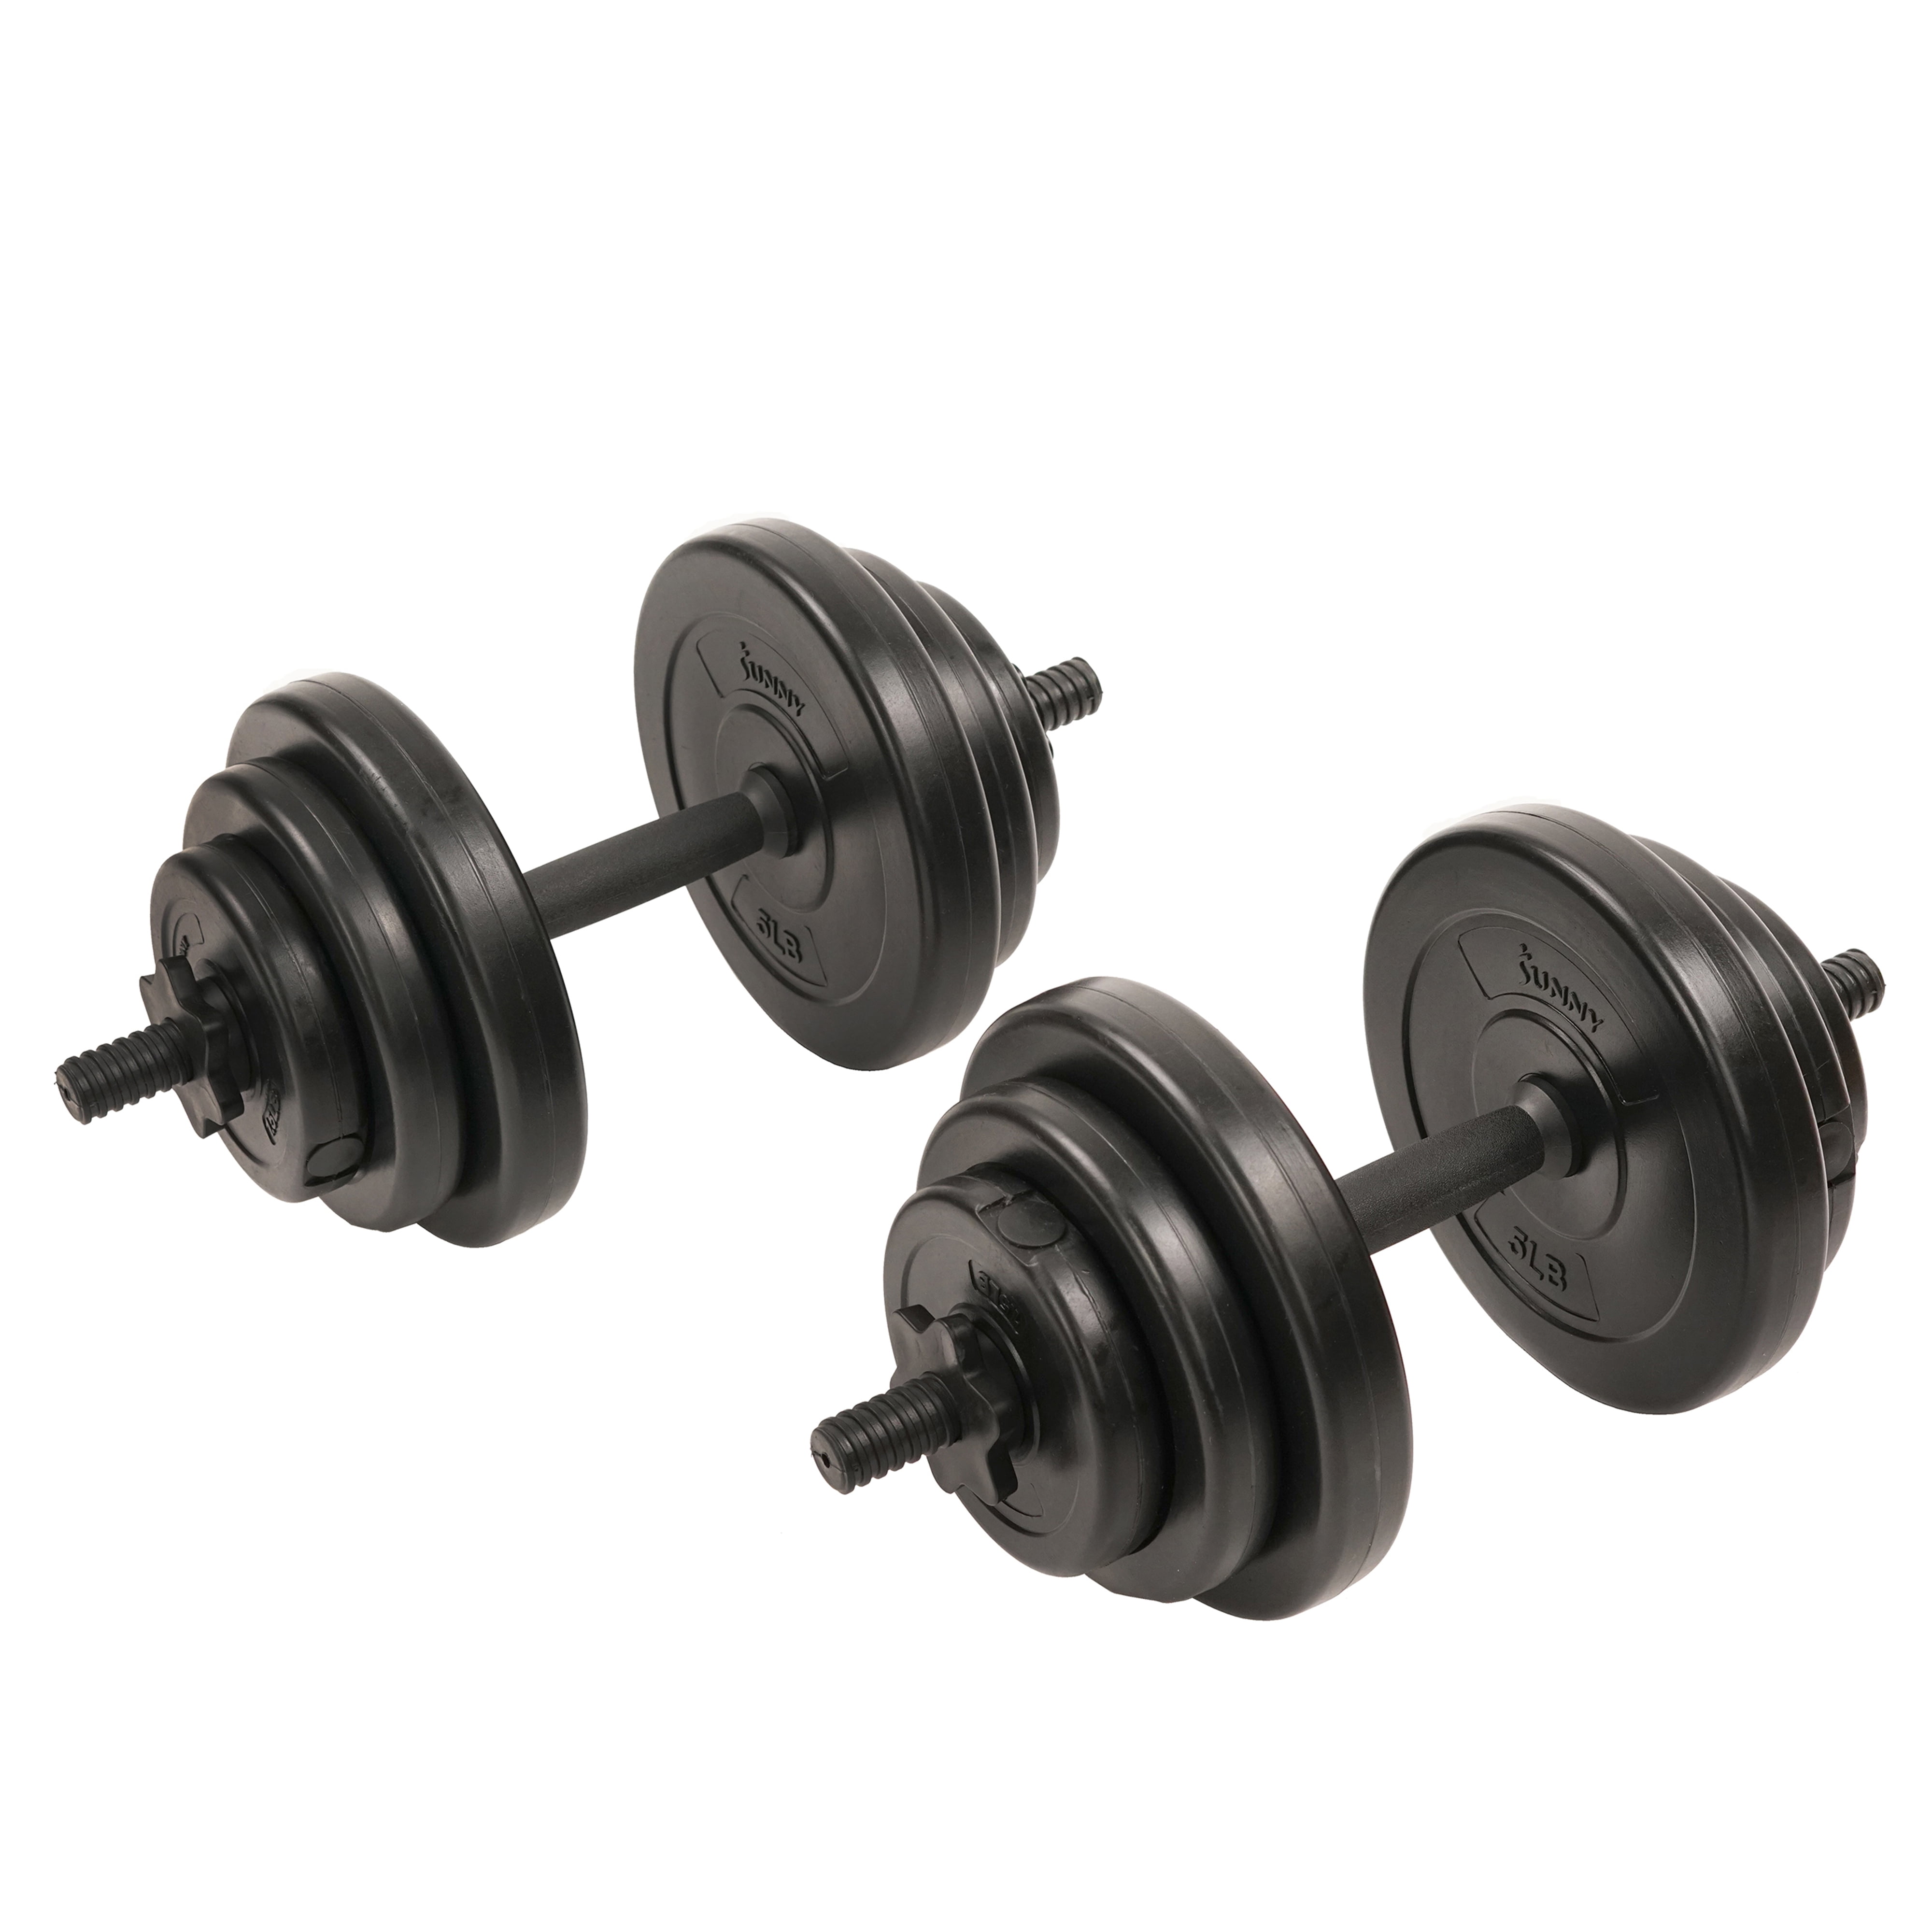 Details about   Total 100LB Weight Steel Dumbbell Set Adjustable Gym Barbell Plates Body Workout 